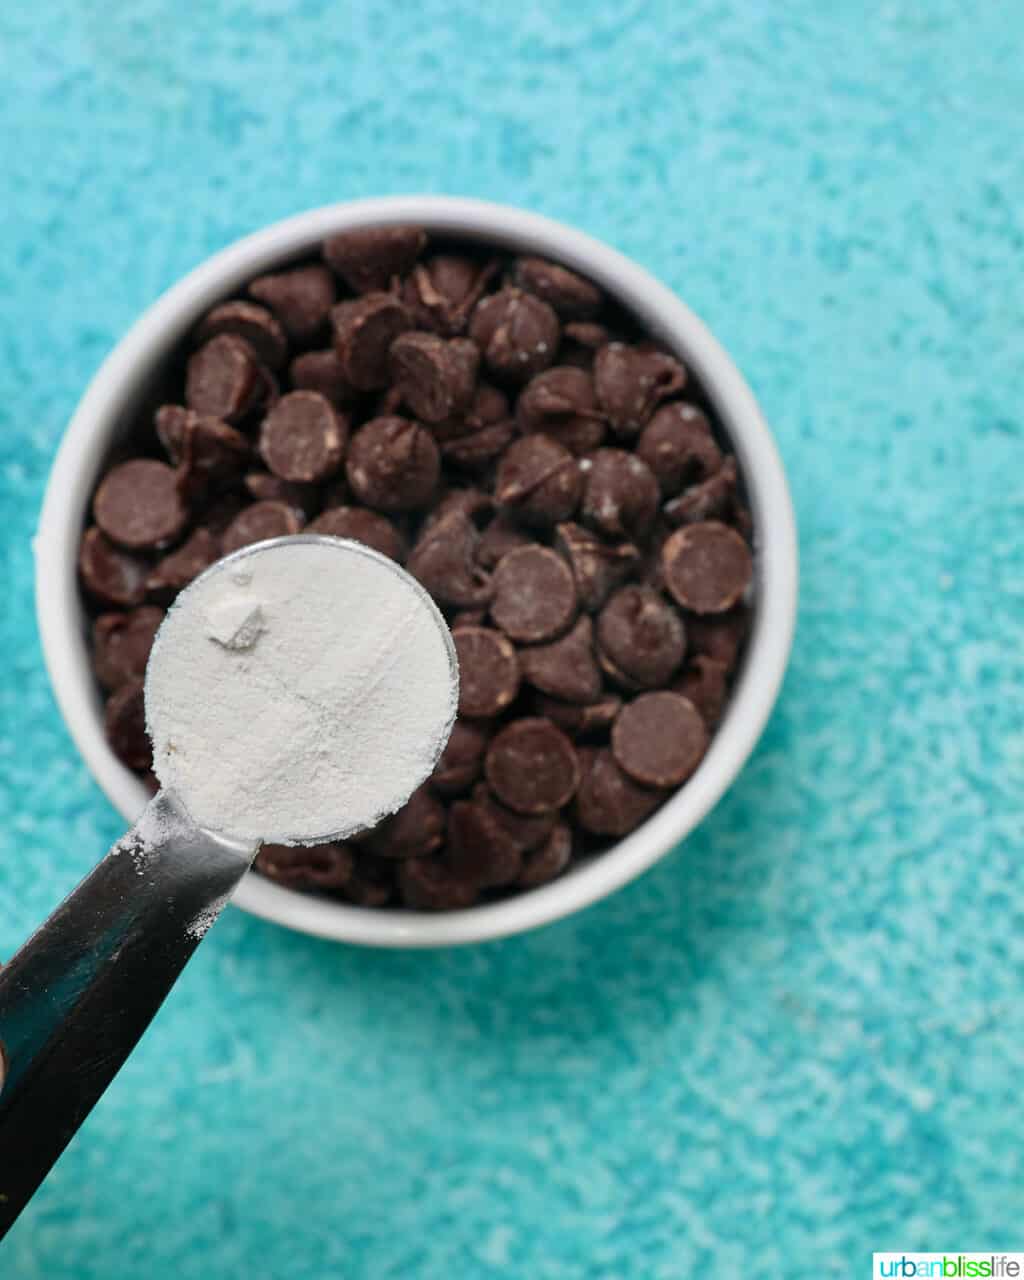 spoonful of flour over a bowl full of chocolate chips on a blue background.